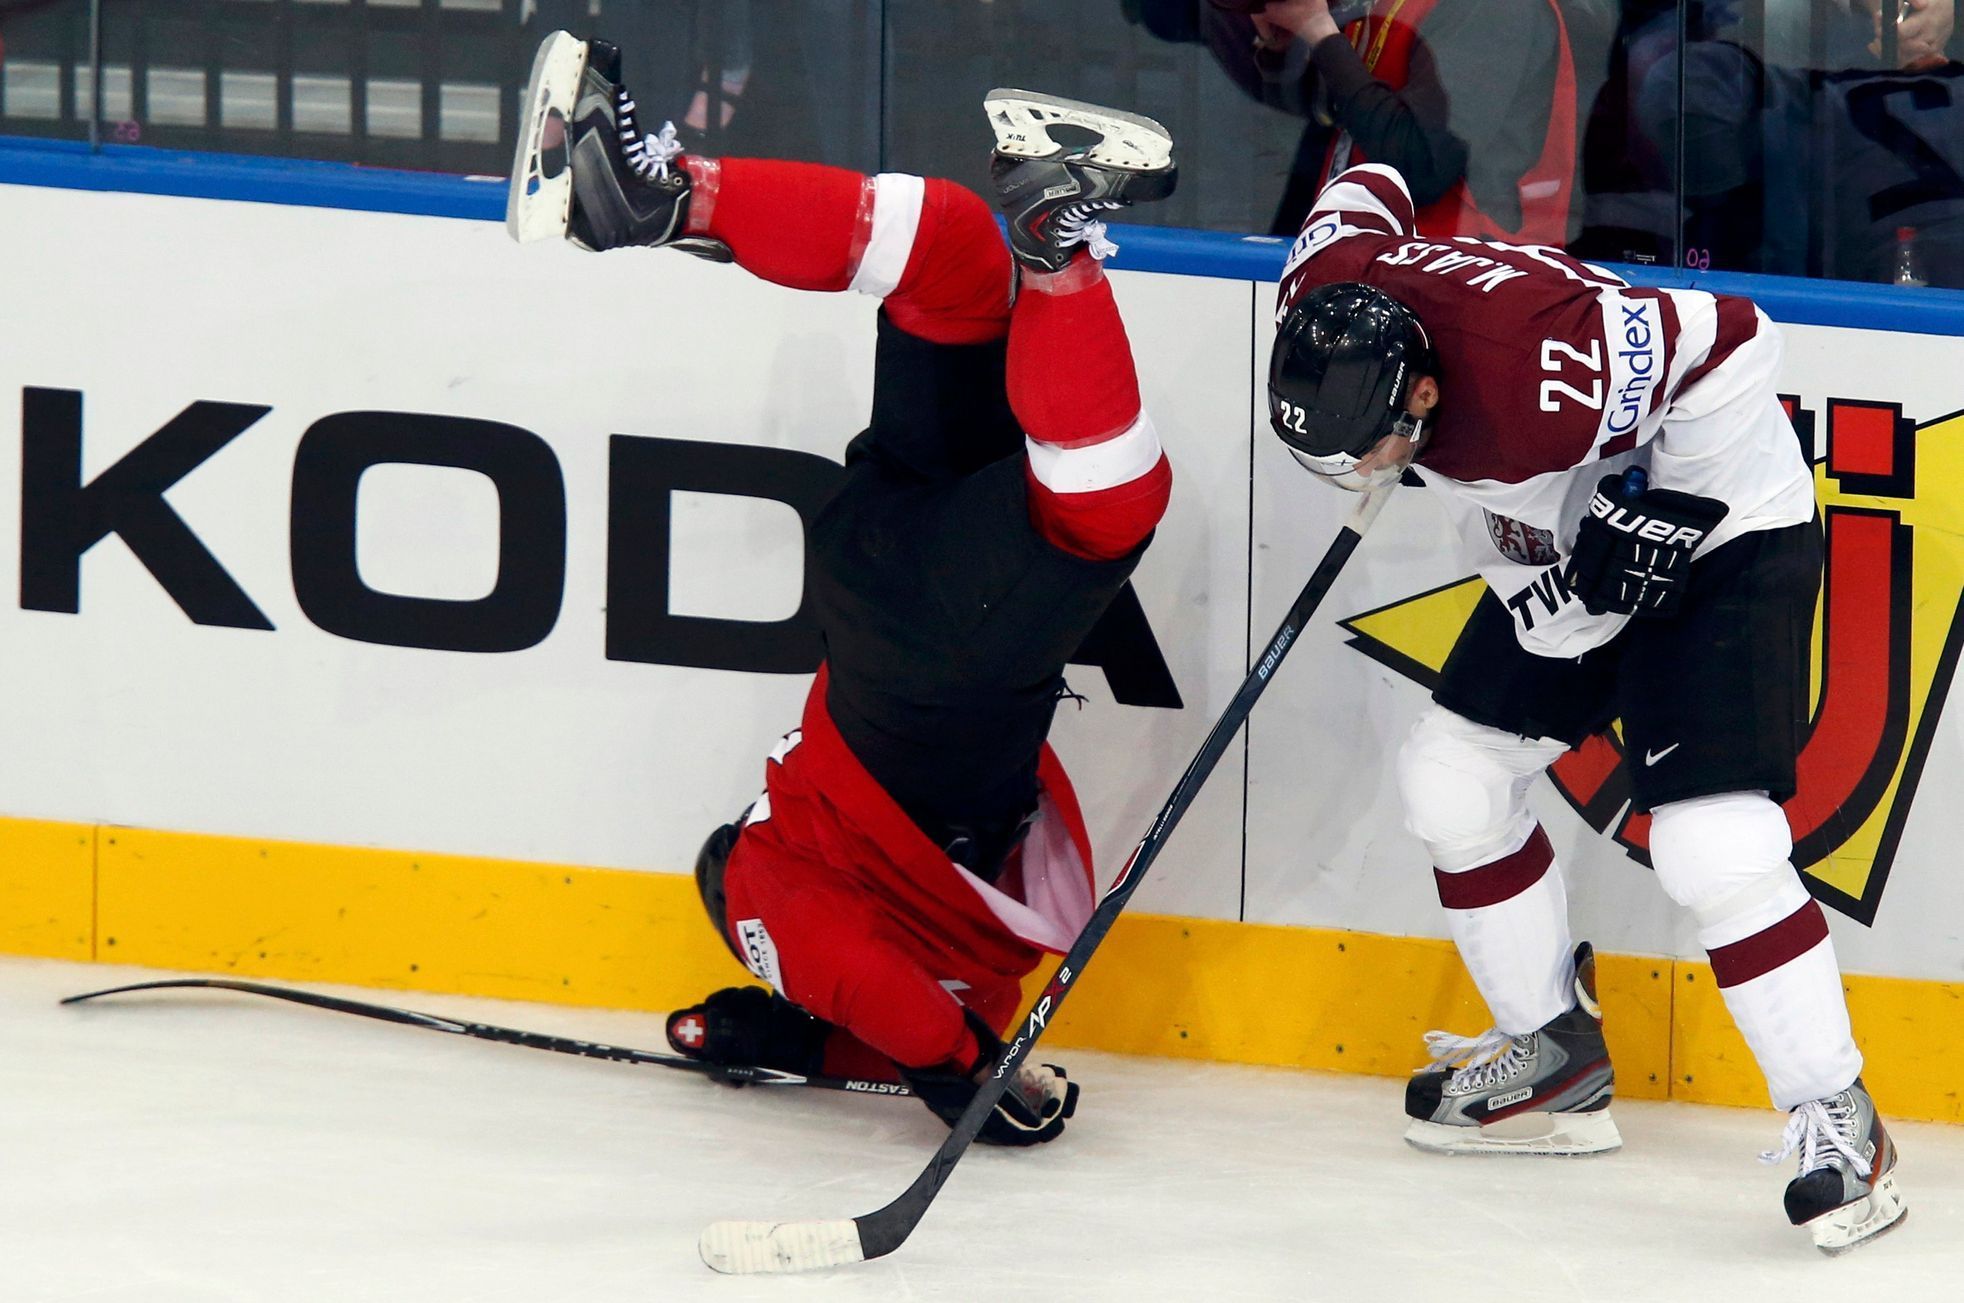 Switzerland's Weber falls after a collision with Latvia's Jass during the third period of their men's ice hockey World Championship Group B game at Minsk Arena in Minsk